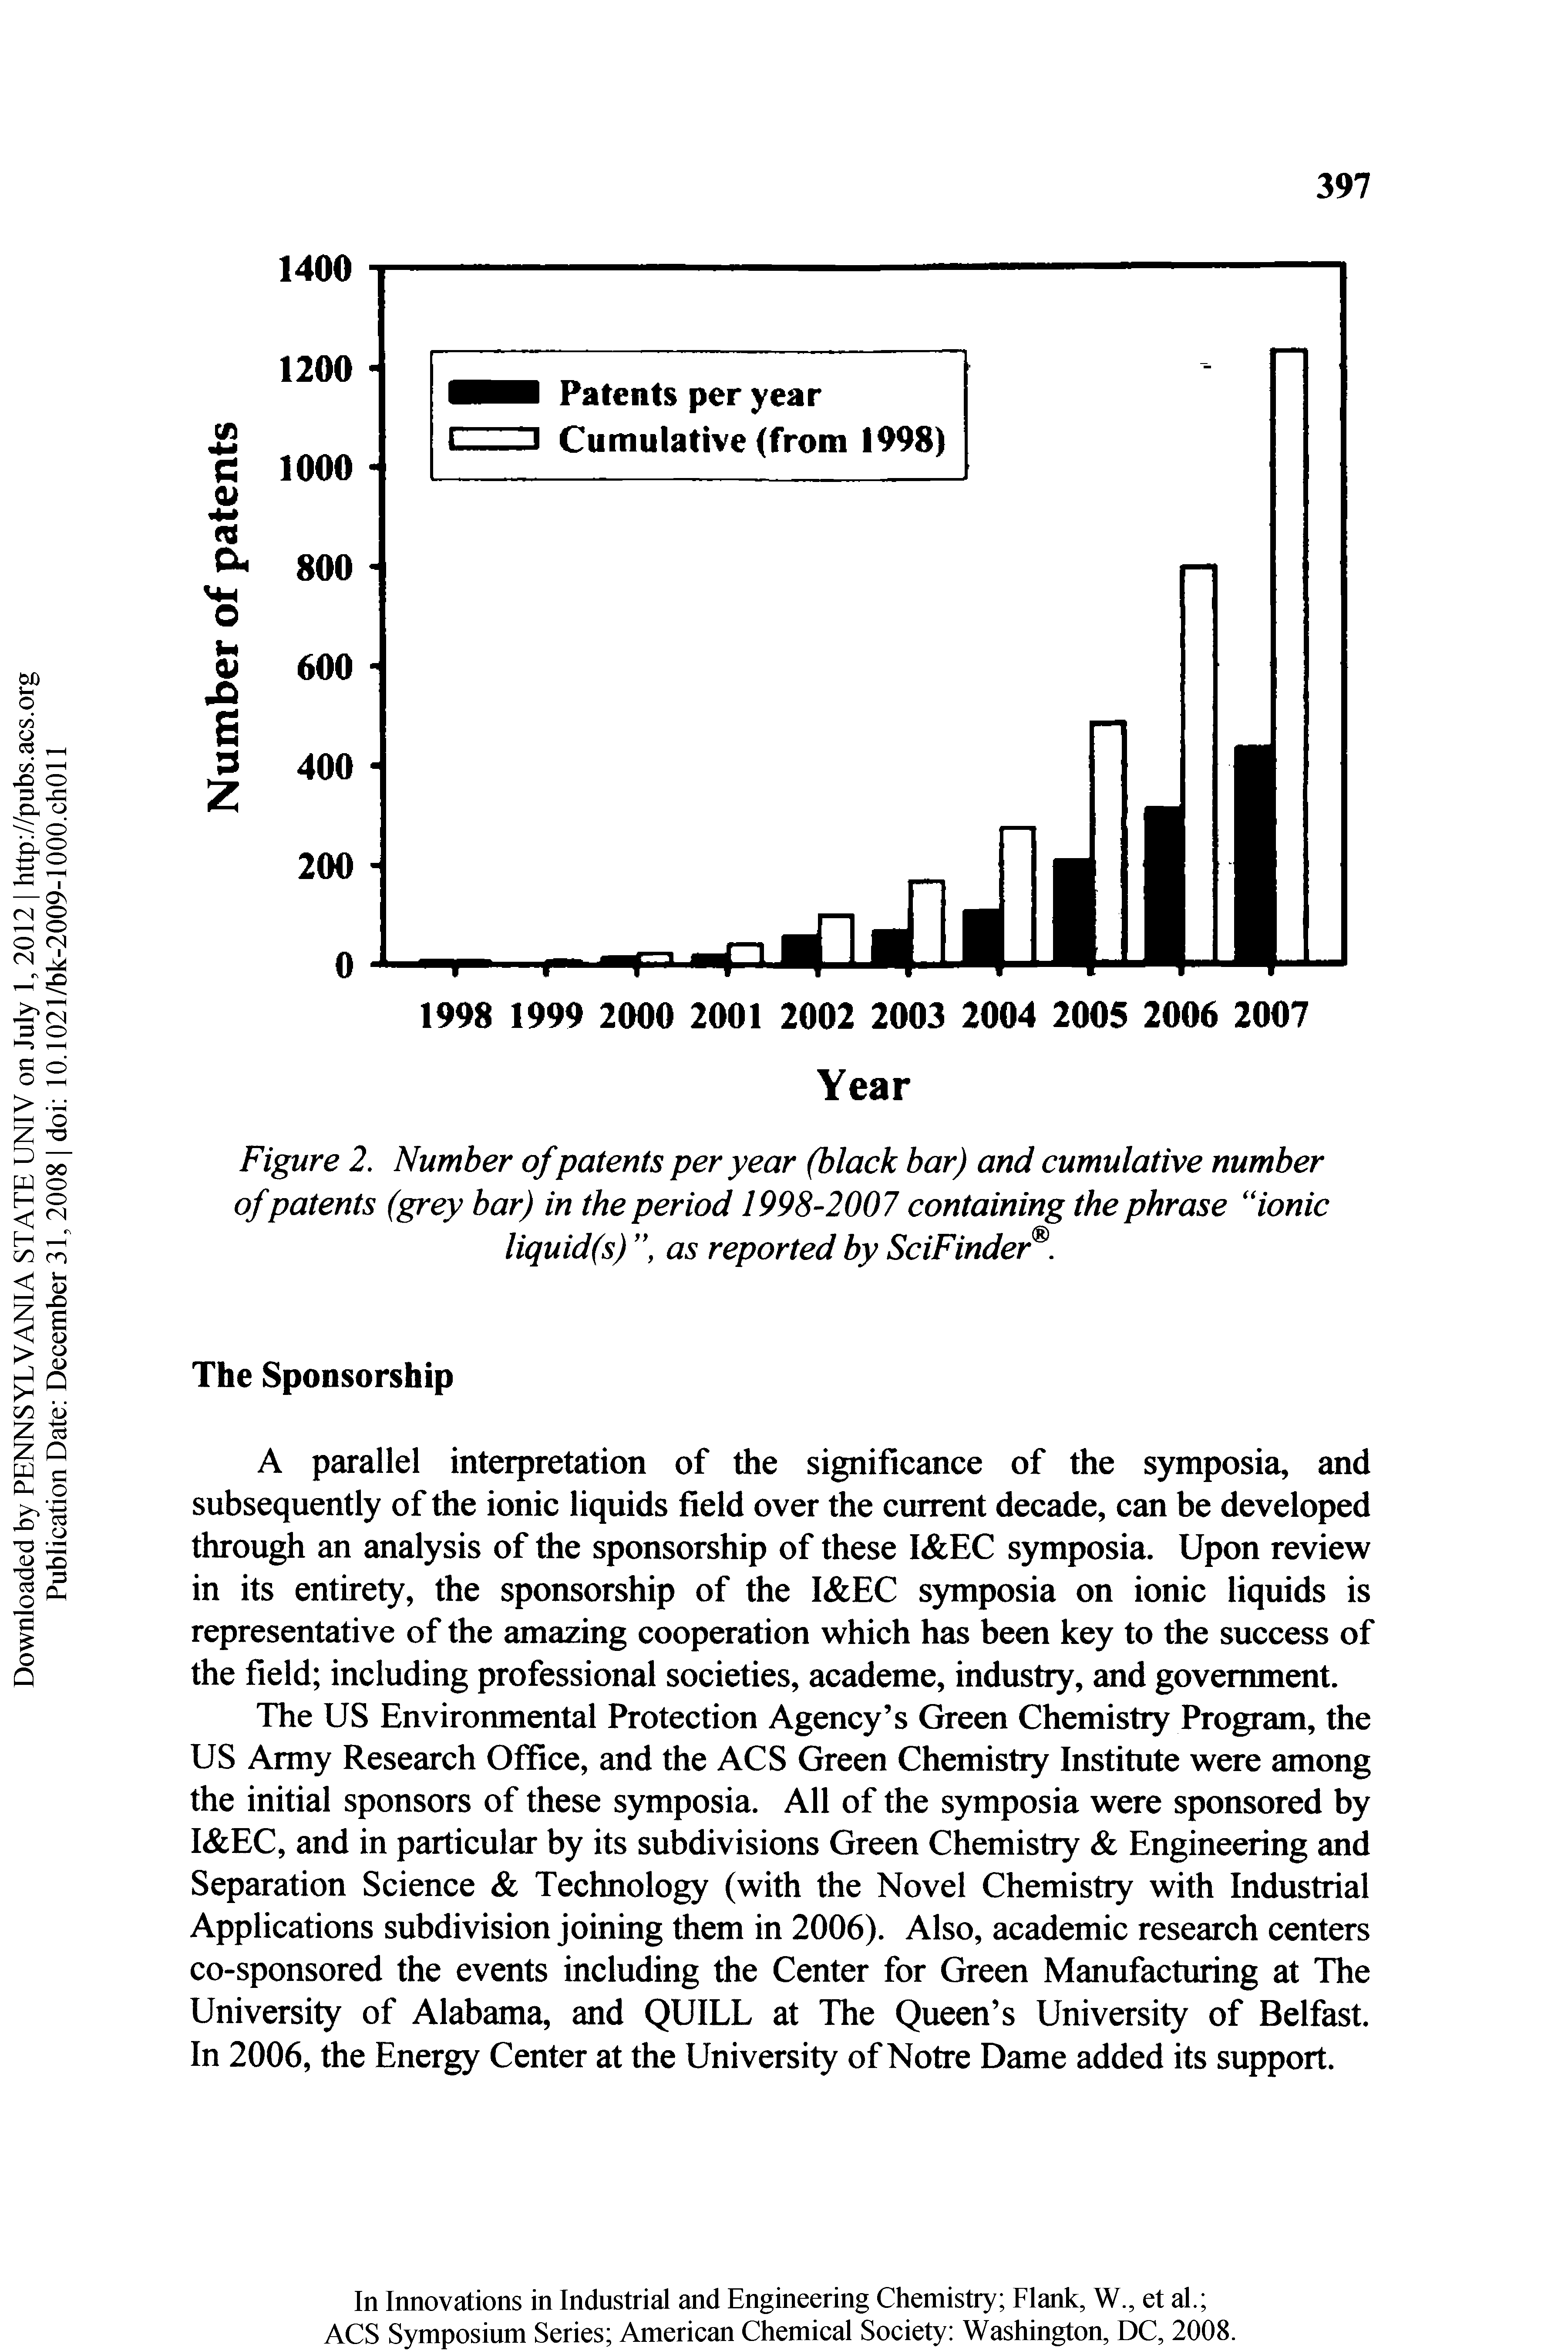 Figure 2. Number of patents per year (black bar) and cumulative number of patents (grey bar) in the period 1998-2007 containing the phrase ionic liquid(s) , as reported by SciFinder .